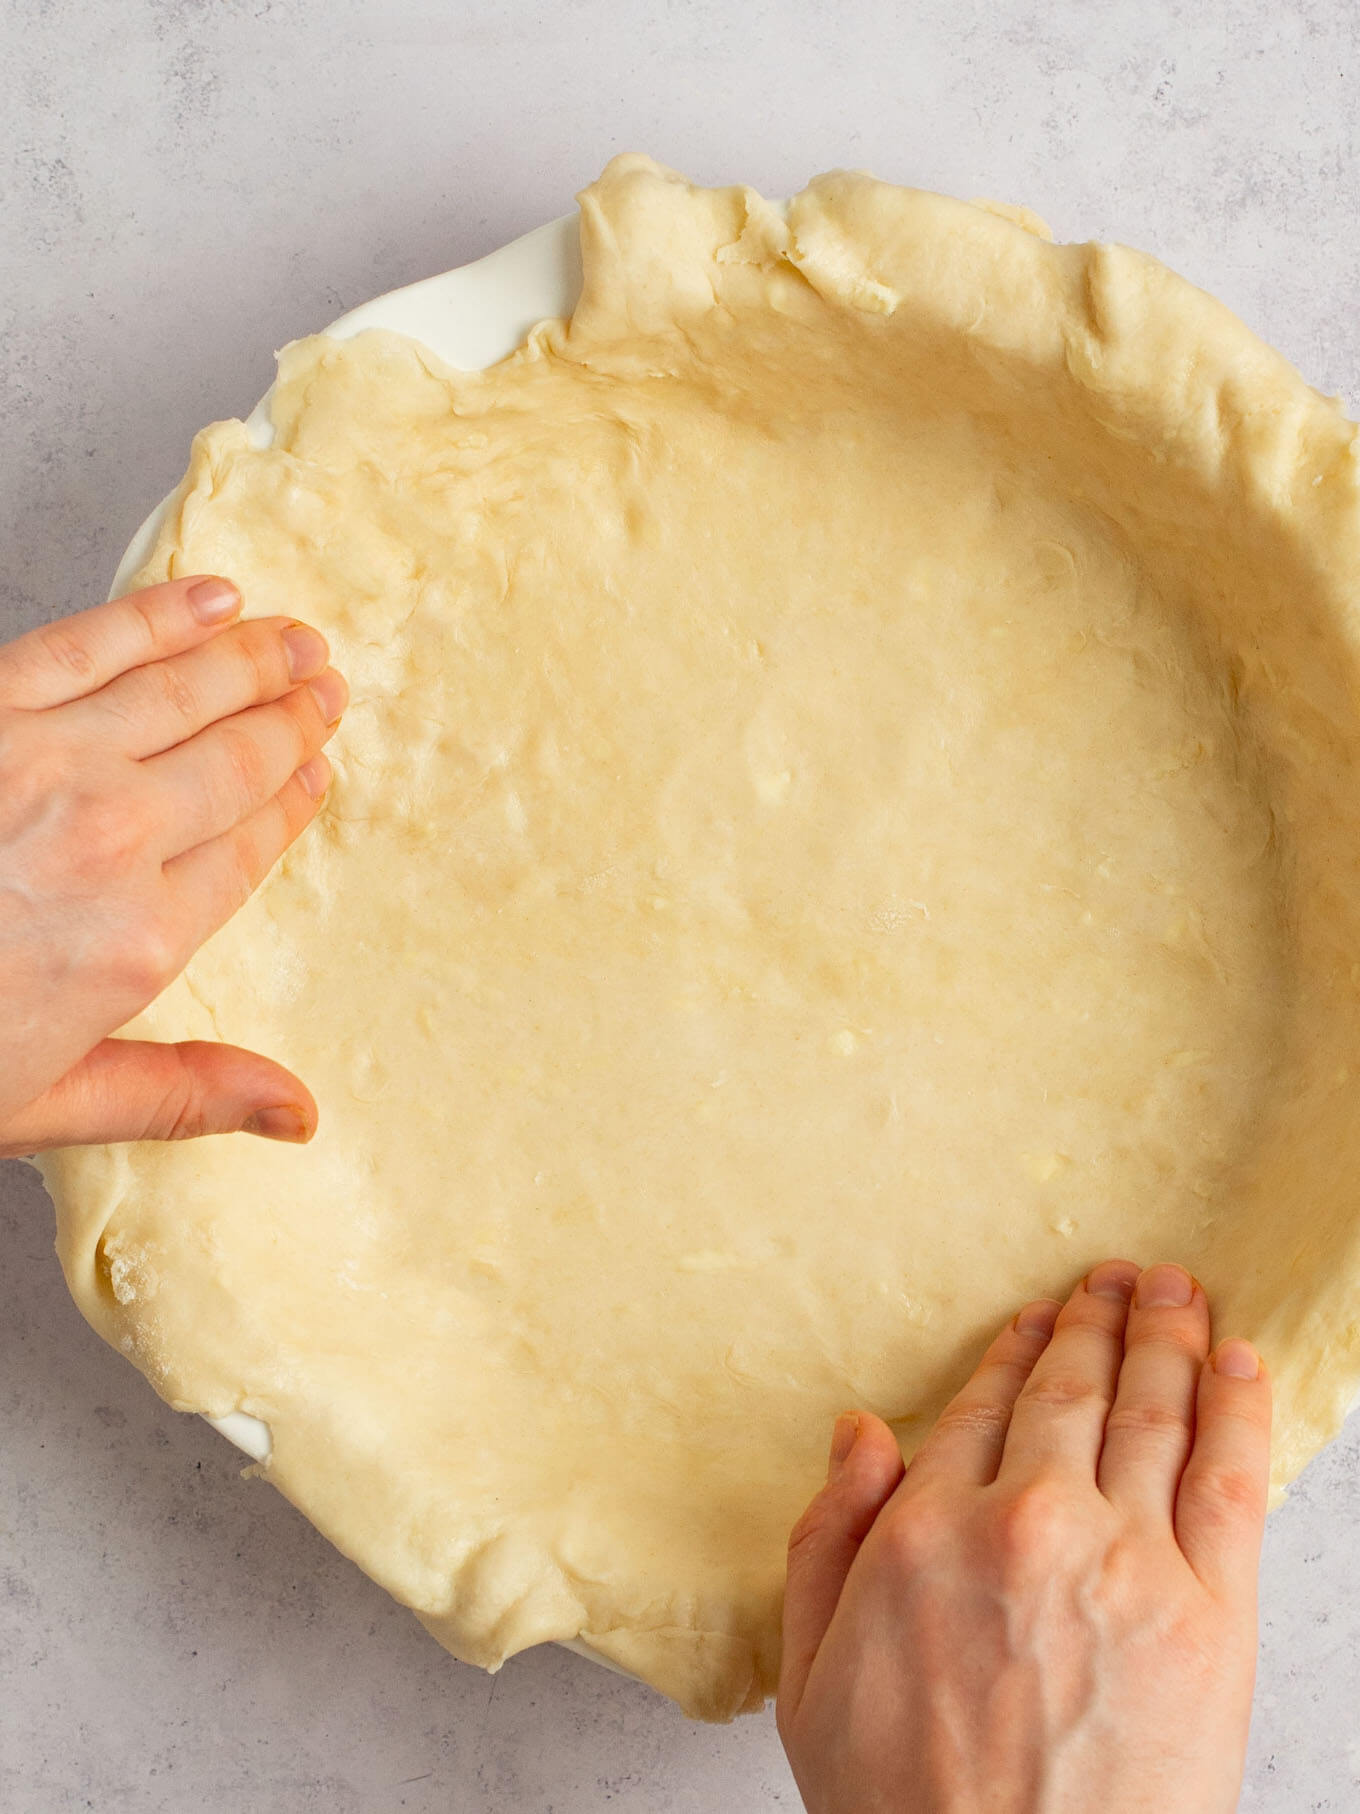 Pie dough being fitted into a pie dish.